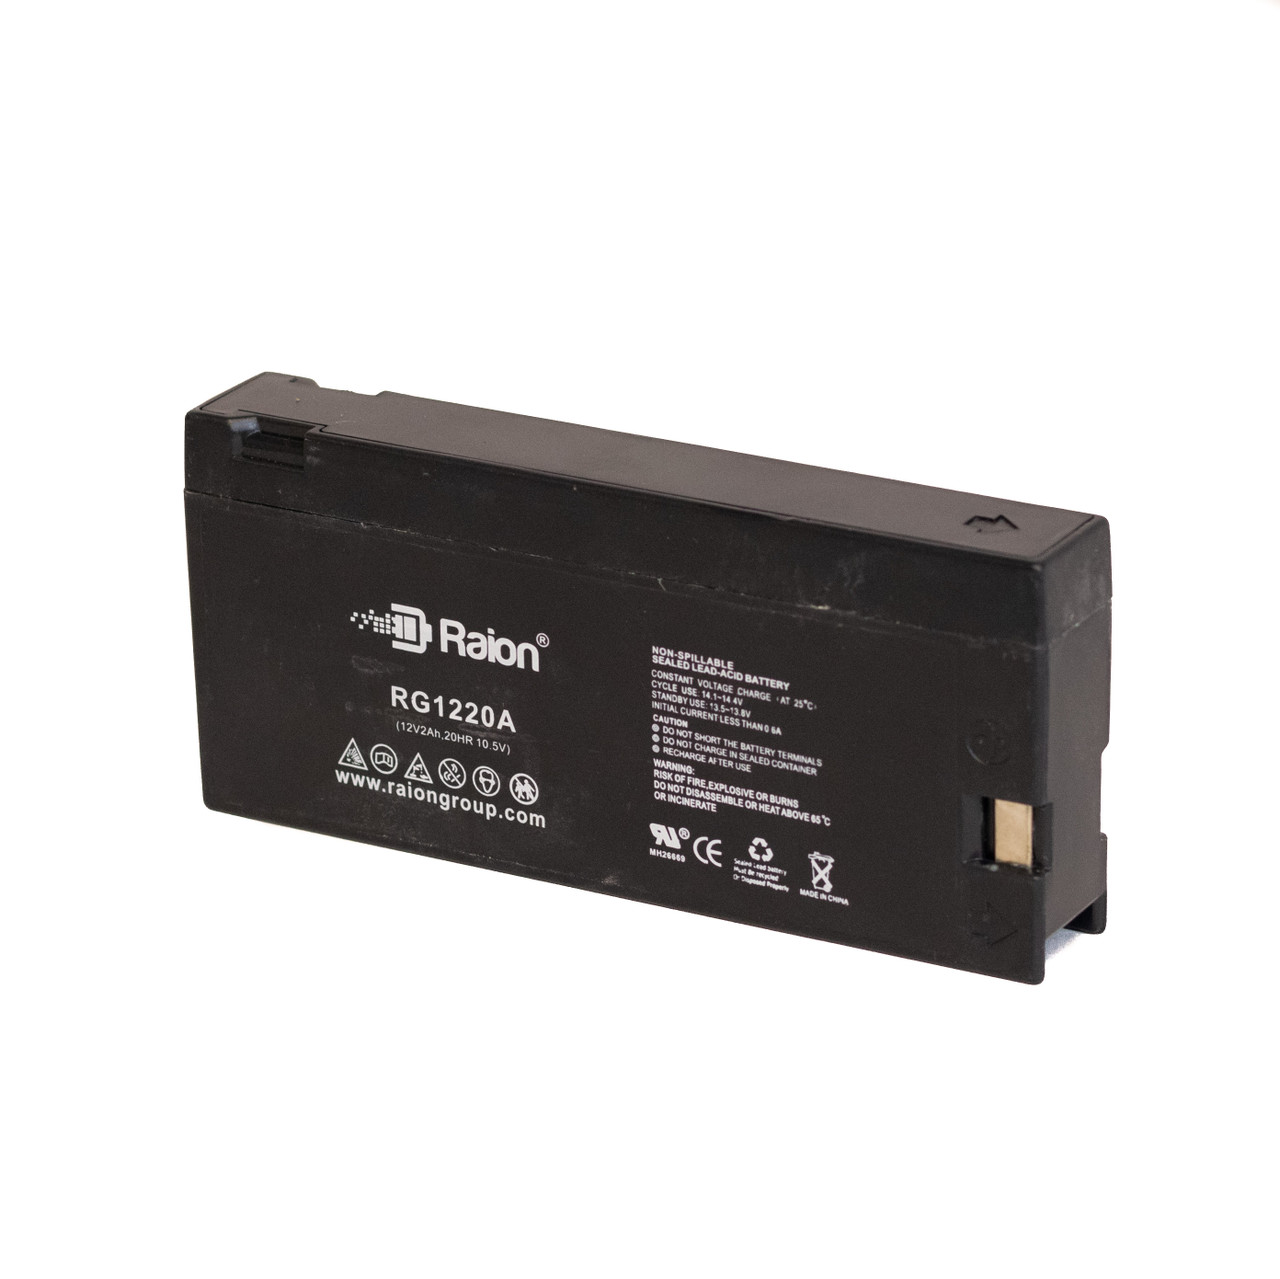 Raion Power RG1220A Replacement Battery for JC Penney 855-8959